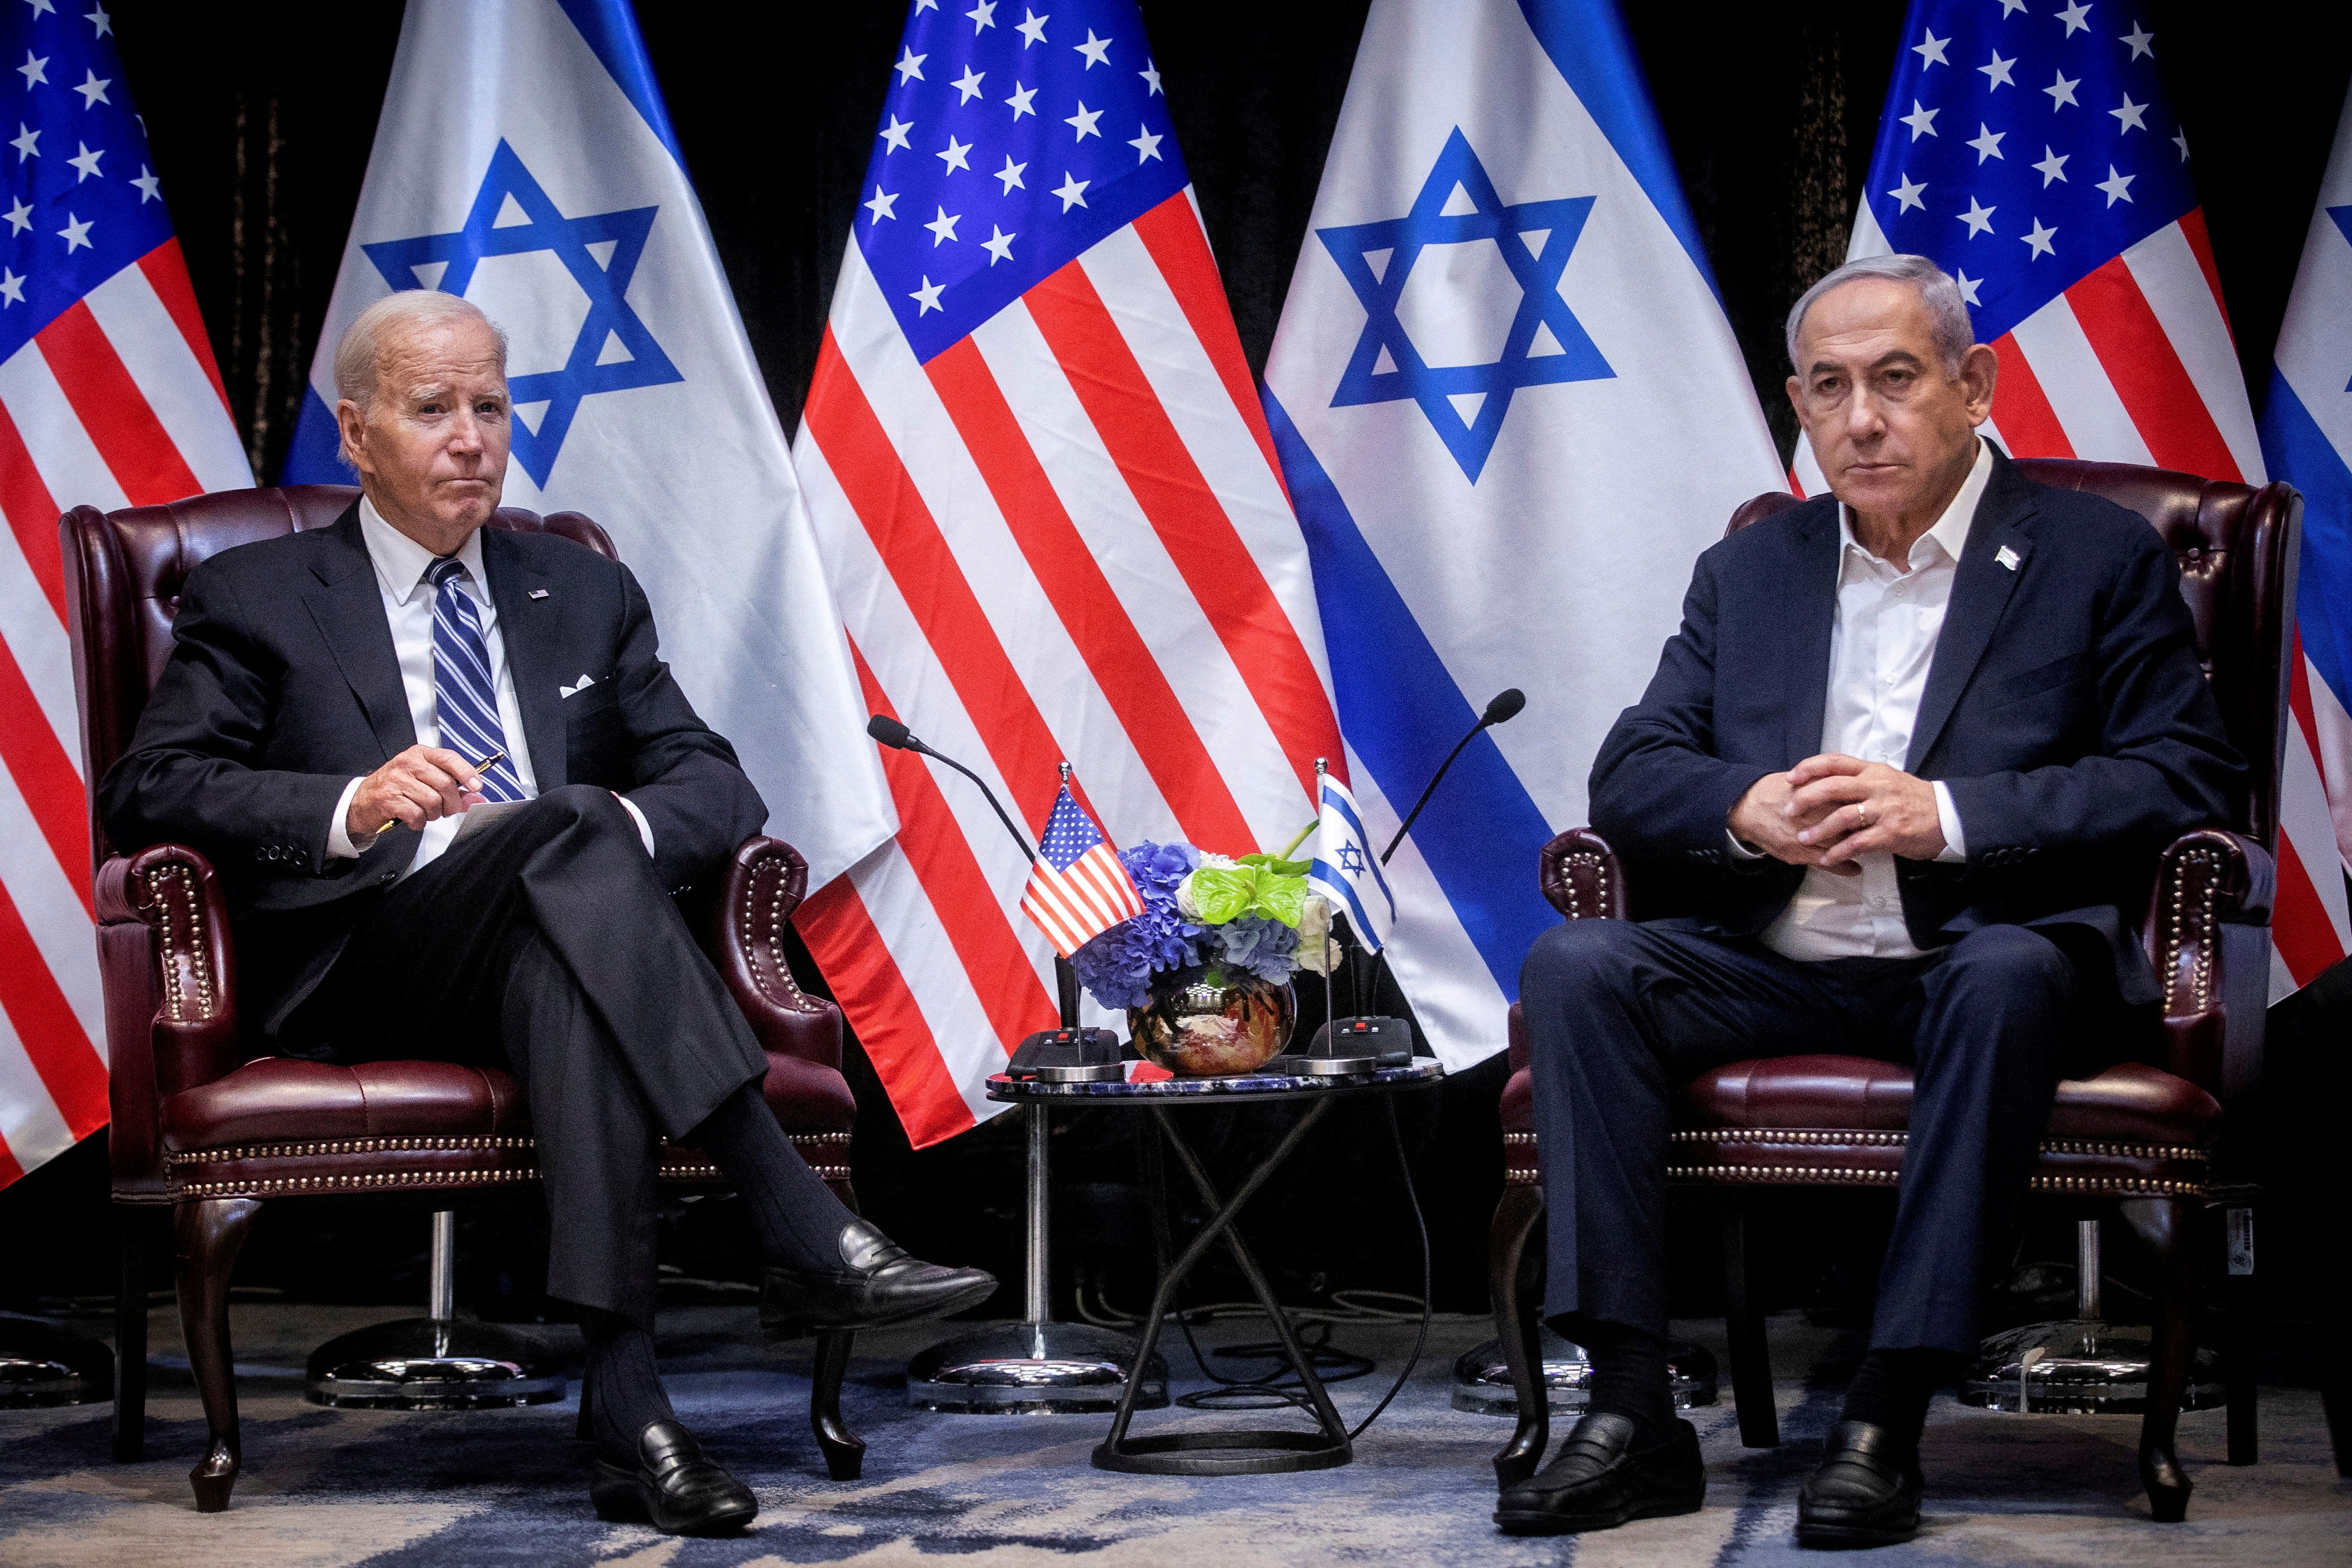 biden says us support for israel remains ‘ironclad’ amid threat of ‘significant attack’ from iran